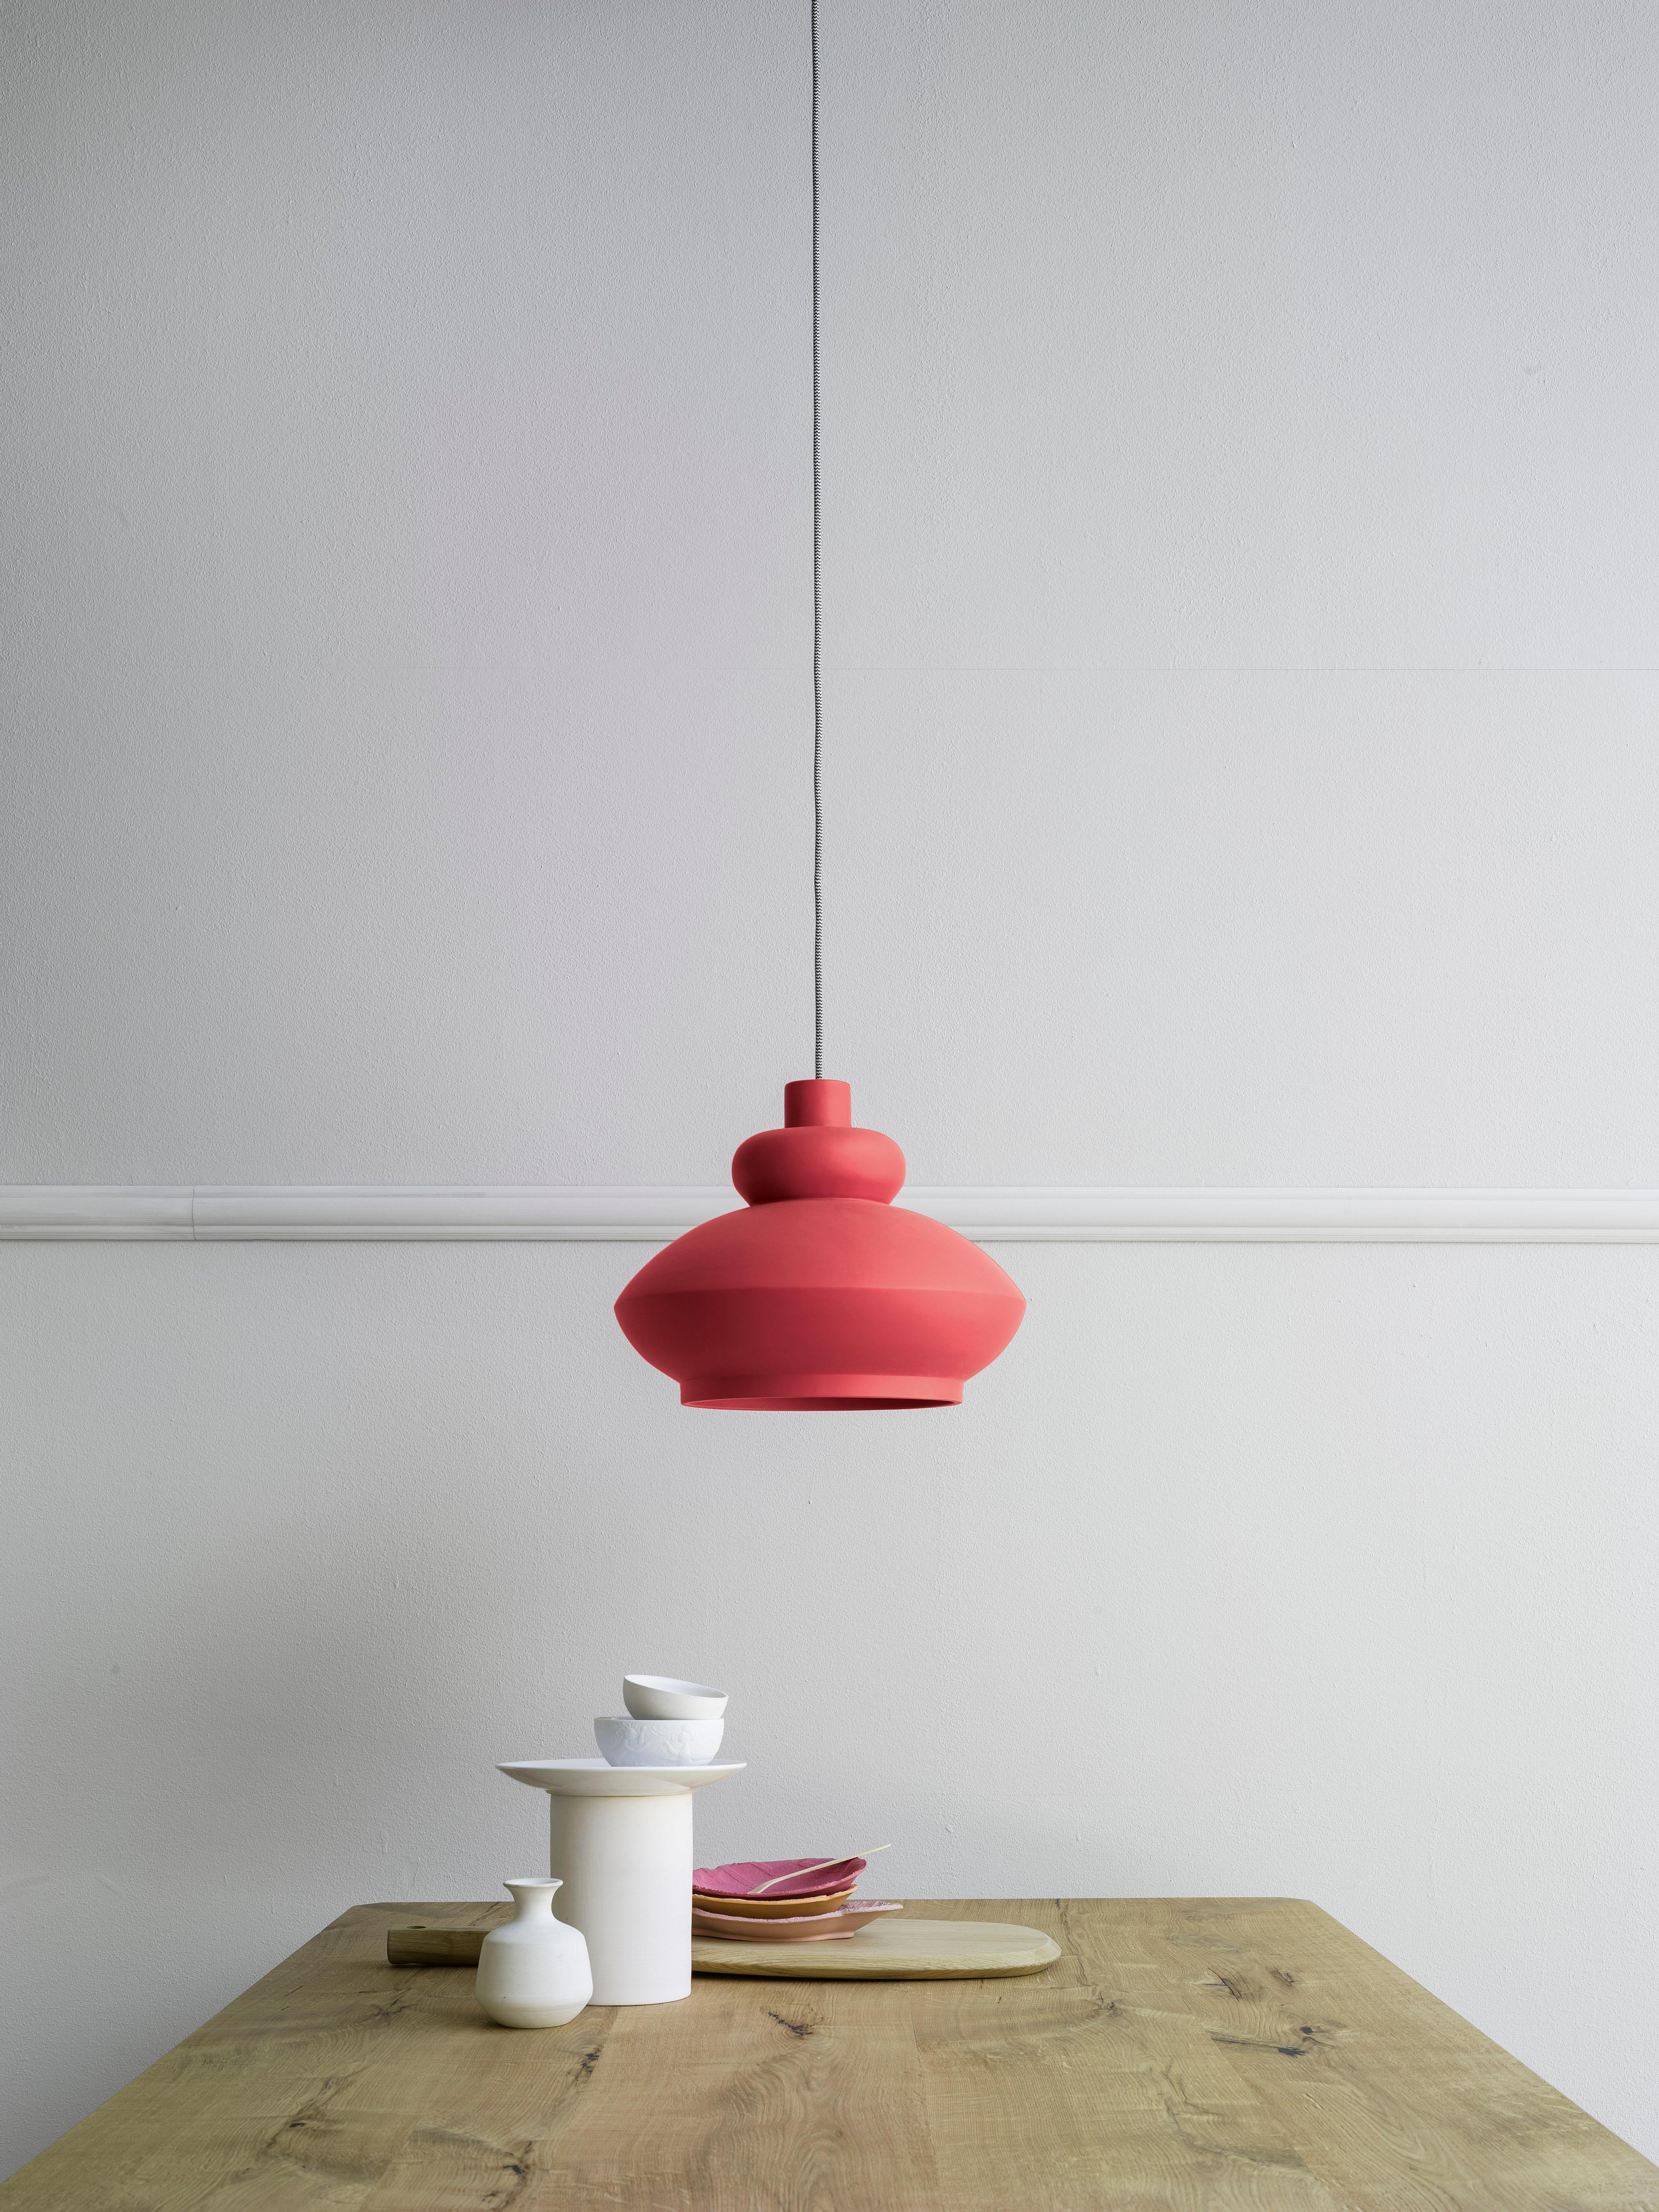 Tora, a ceramic pendant lamp in matte pastel colors, draws its inspiration from Arab lanterns and old oil lamps. Designed to be used individually as well as in clusters, in both residential and contract settings. Here you are shown Tora ceramic lamp